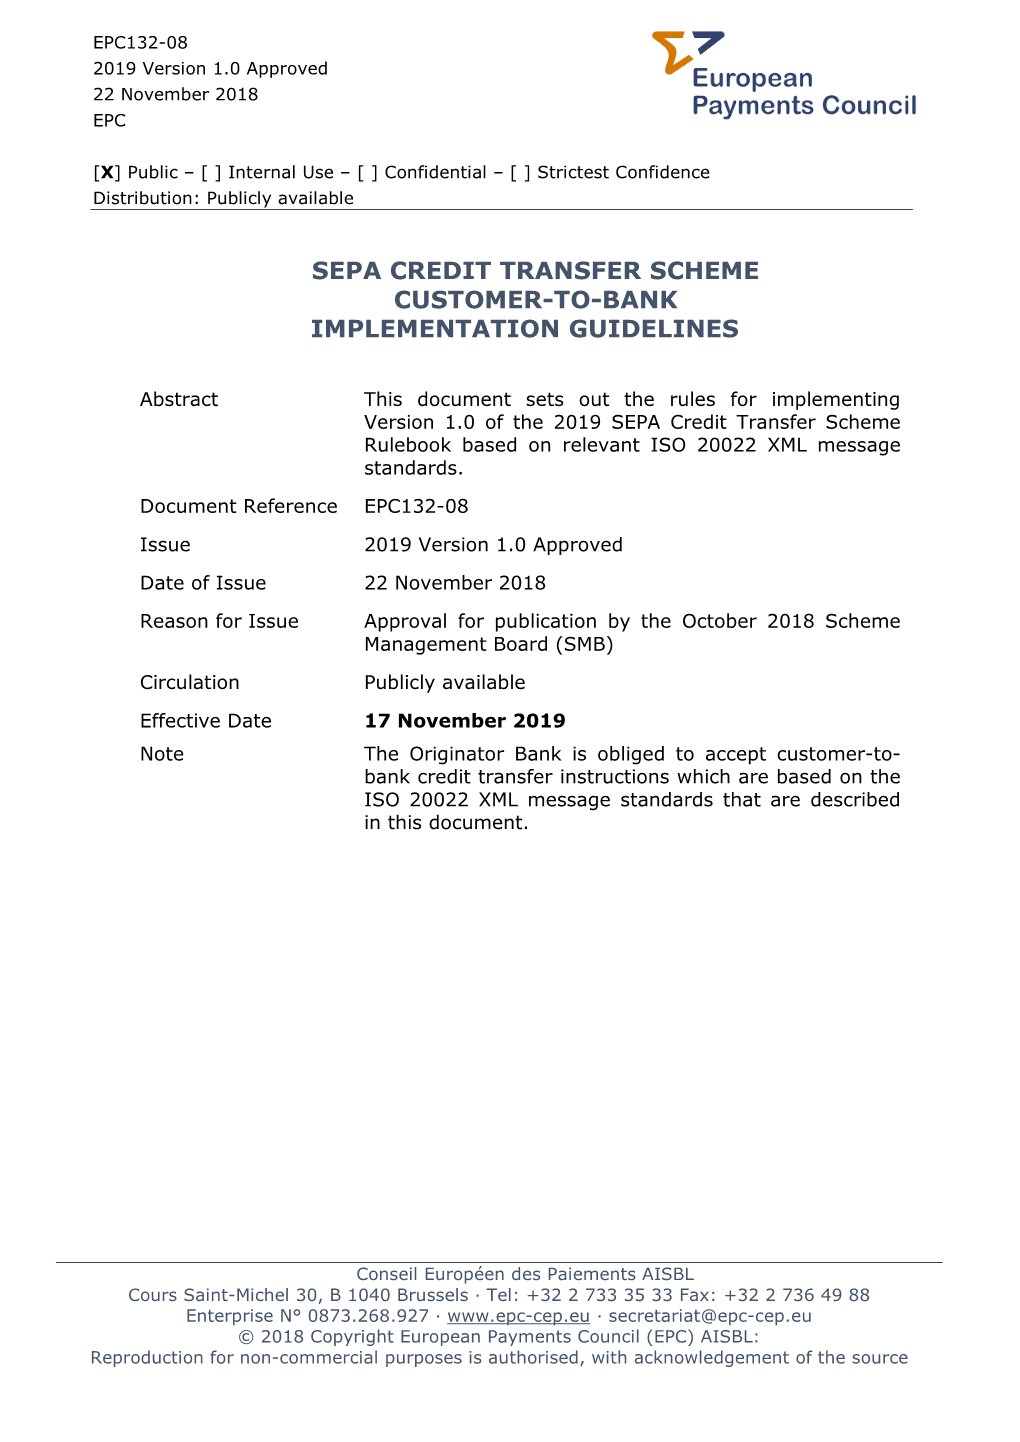 Sepa Credit Transfer Scheme Customer-To-Bank Implementation Guidelines